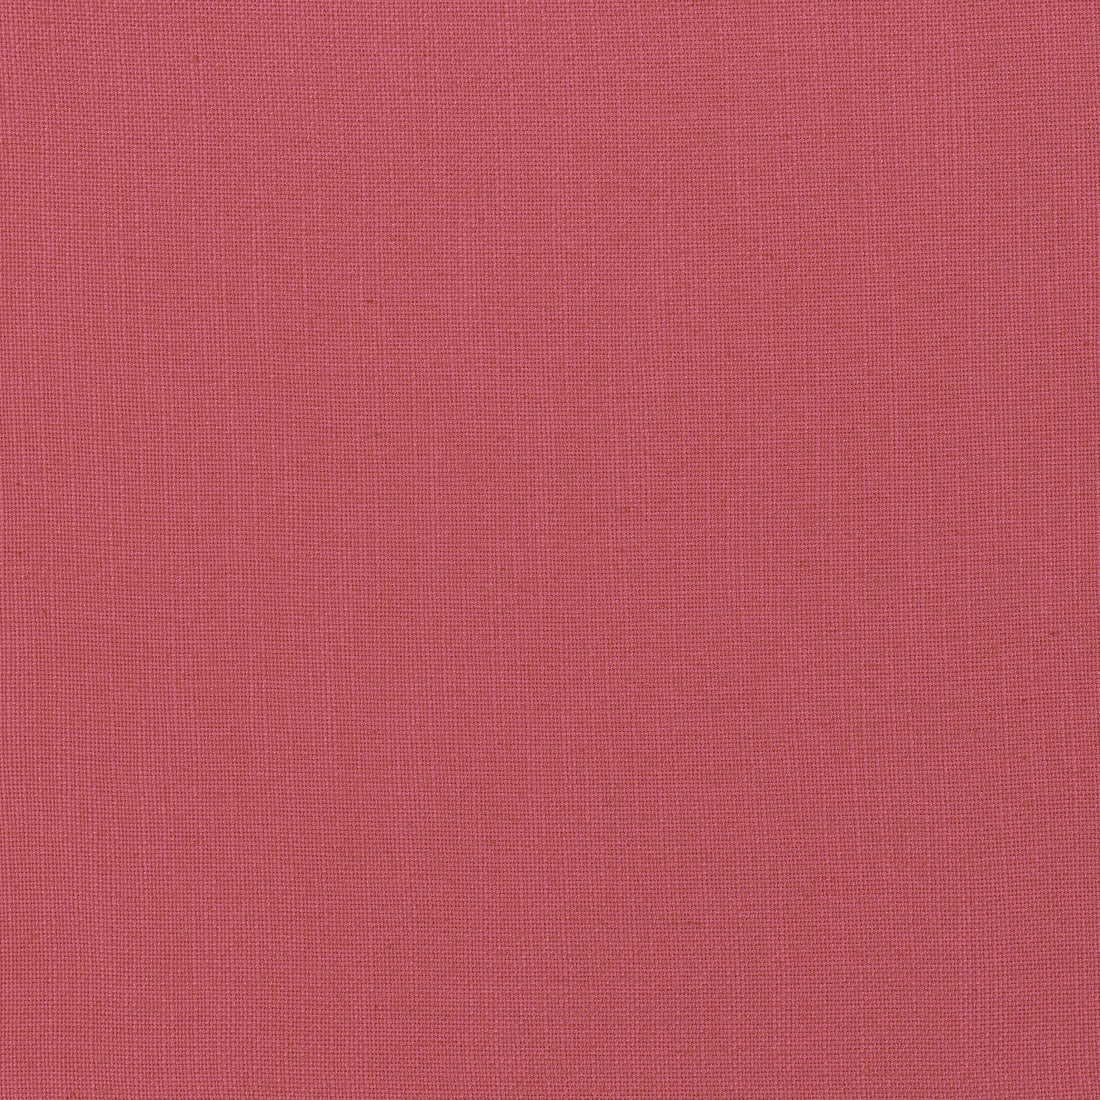 Palisade Linen fabric in peony color - pattern number FWW7634 - by Thibaut in the Palisades collection